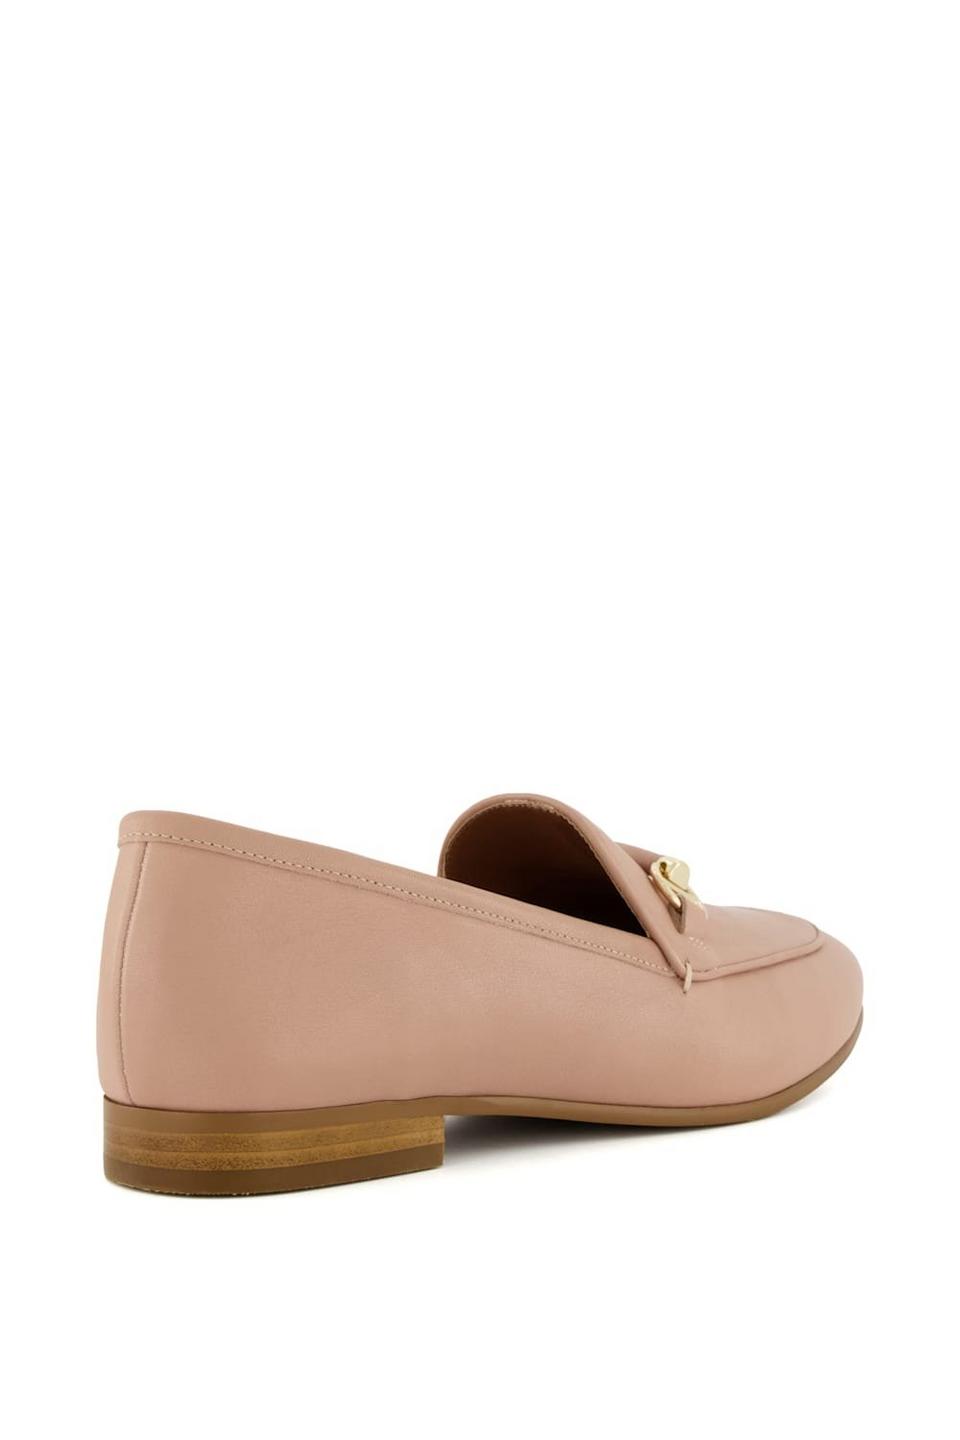 Flats | 'Grandeur' Leather Loafers | Dune London